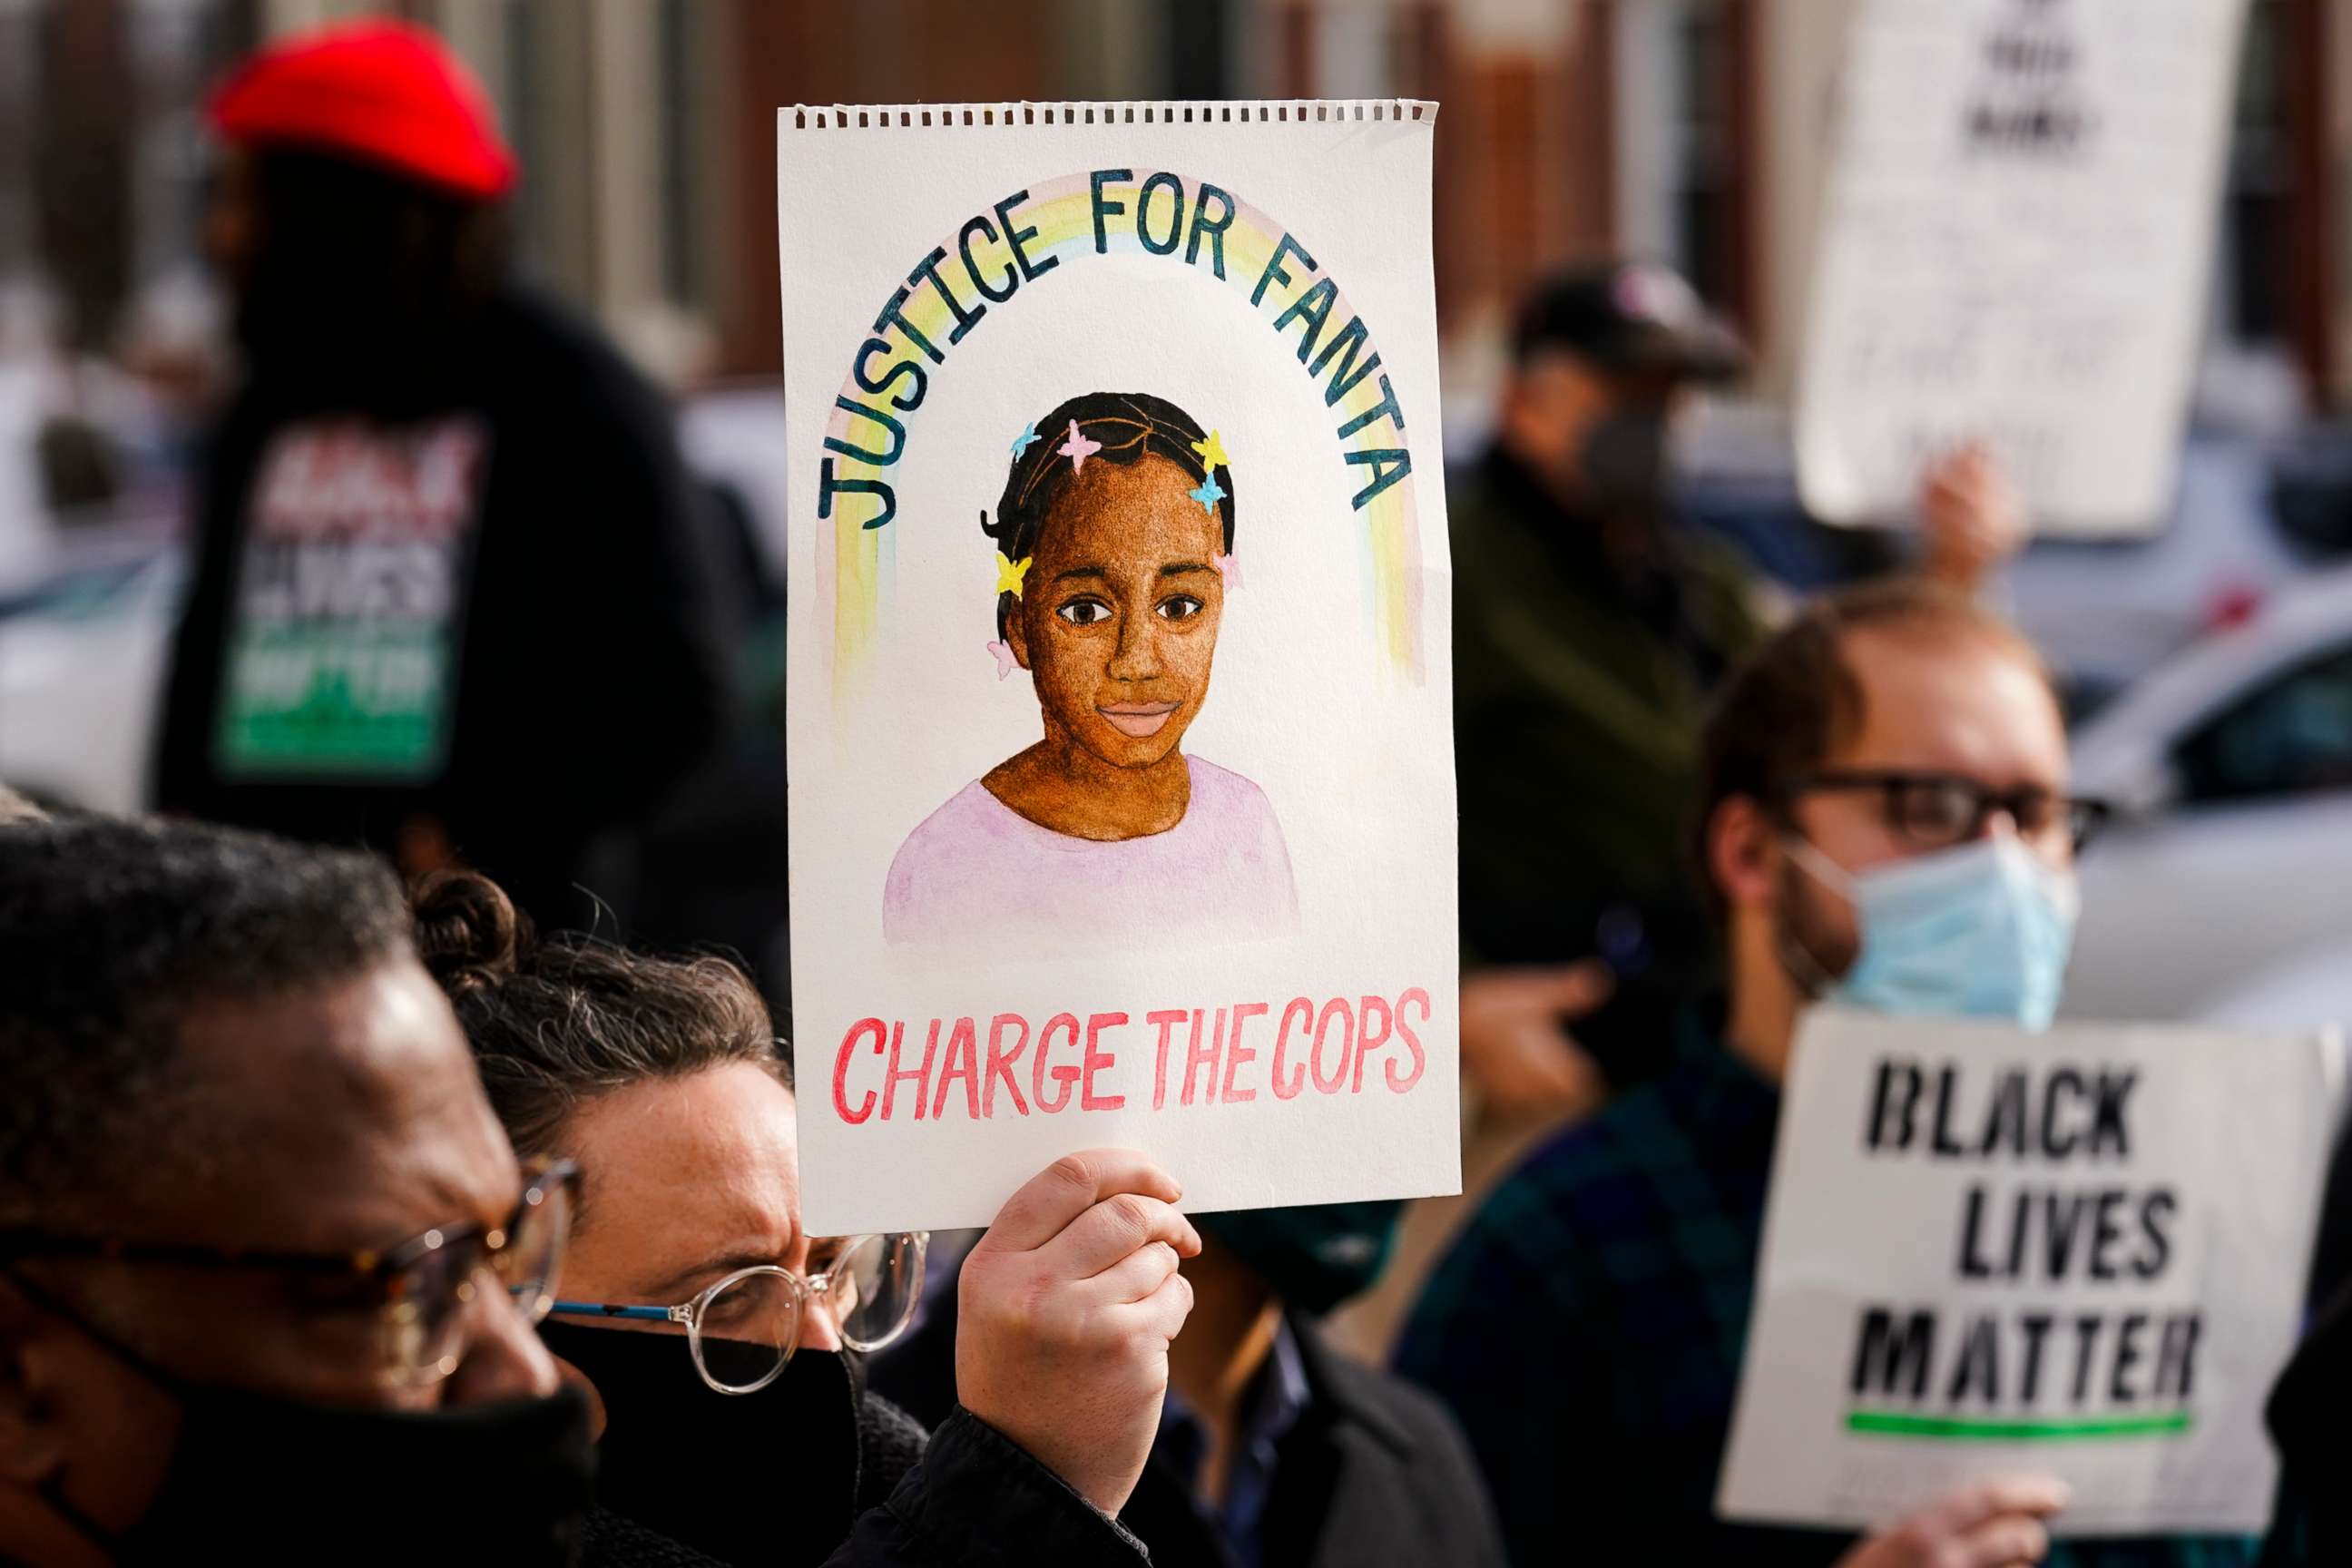 PHOTO: Protesters demonstrate calling for police accountability in the death of 8-year-old Fanta Bility who was shot outside a football game, at the Delaware County Courthouse in Media, Pa., on Jan. 13, 2022.